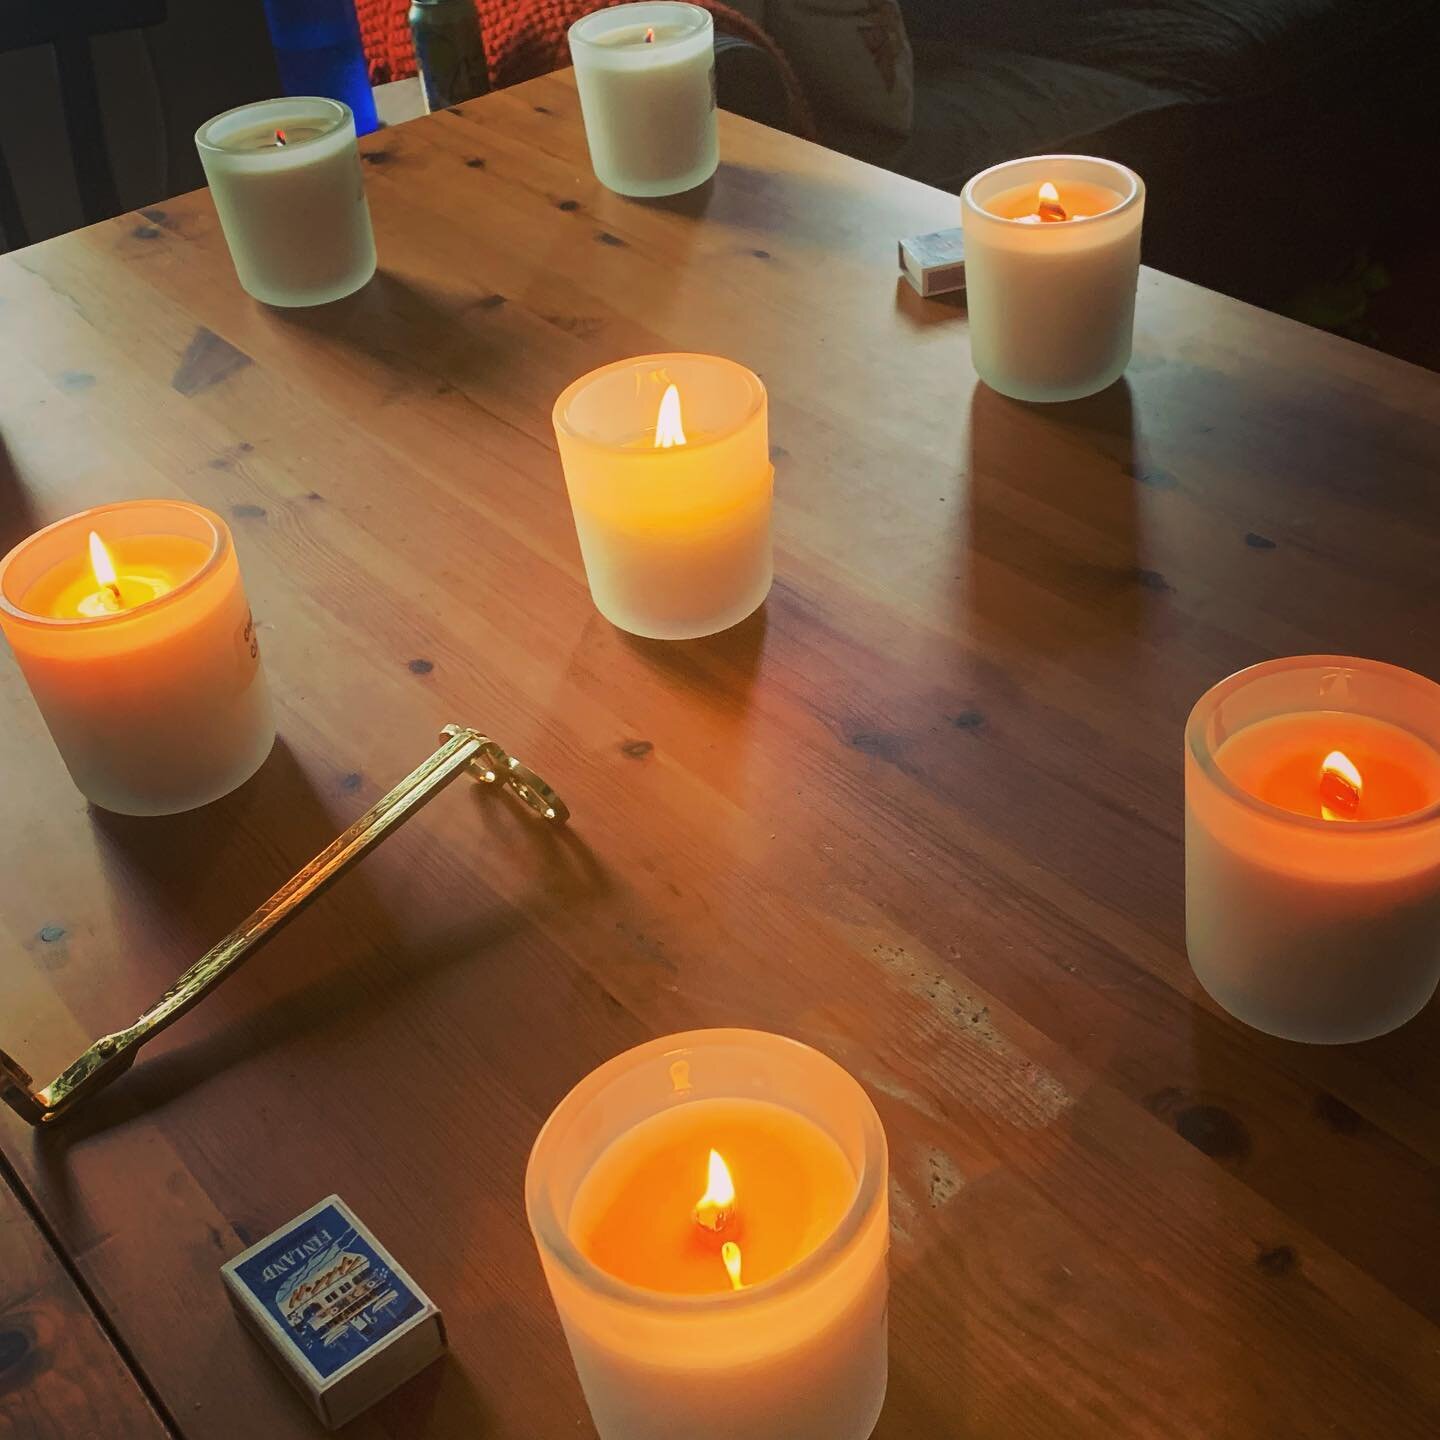 Rainy, overcast day is the perfect day to burn test a buncha wicks using leftover Christmas fragrances! 🔥🔥🔥

#scentedcandles #woodenwick #gottoadmititsgettingbetter #brooklyn